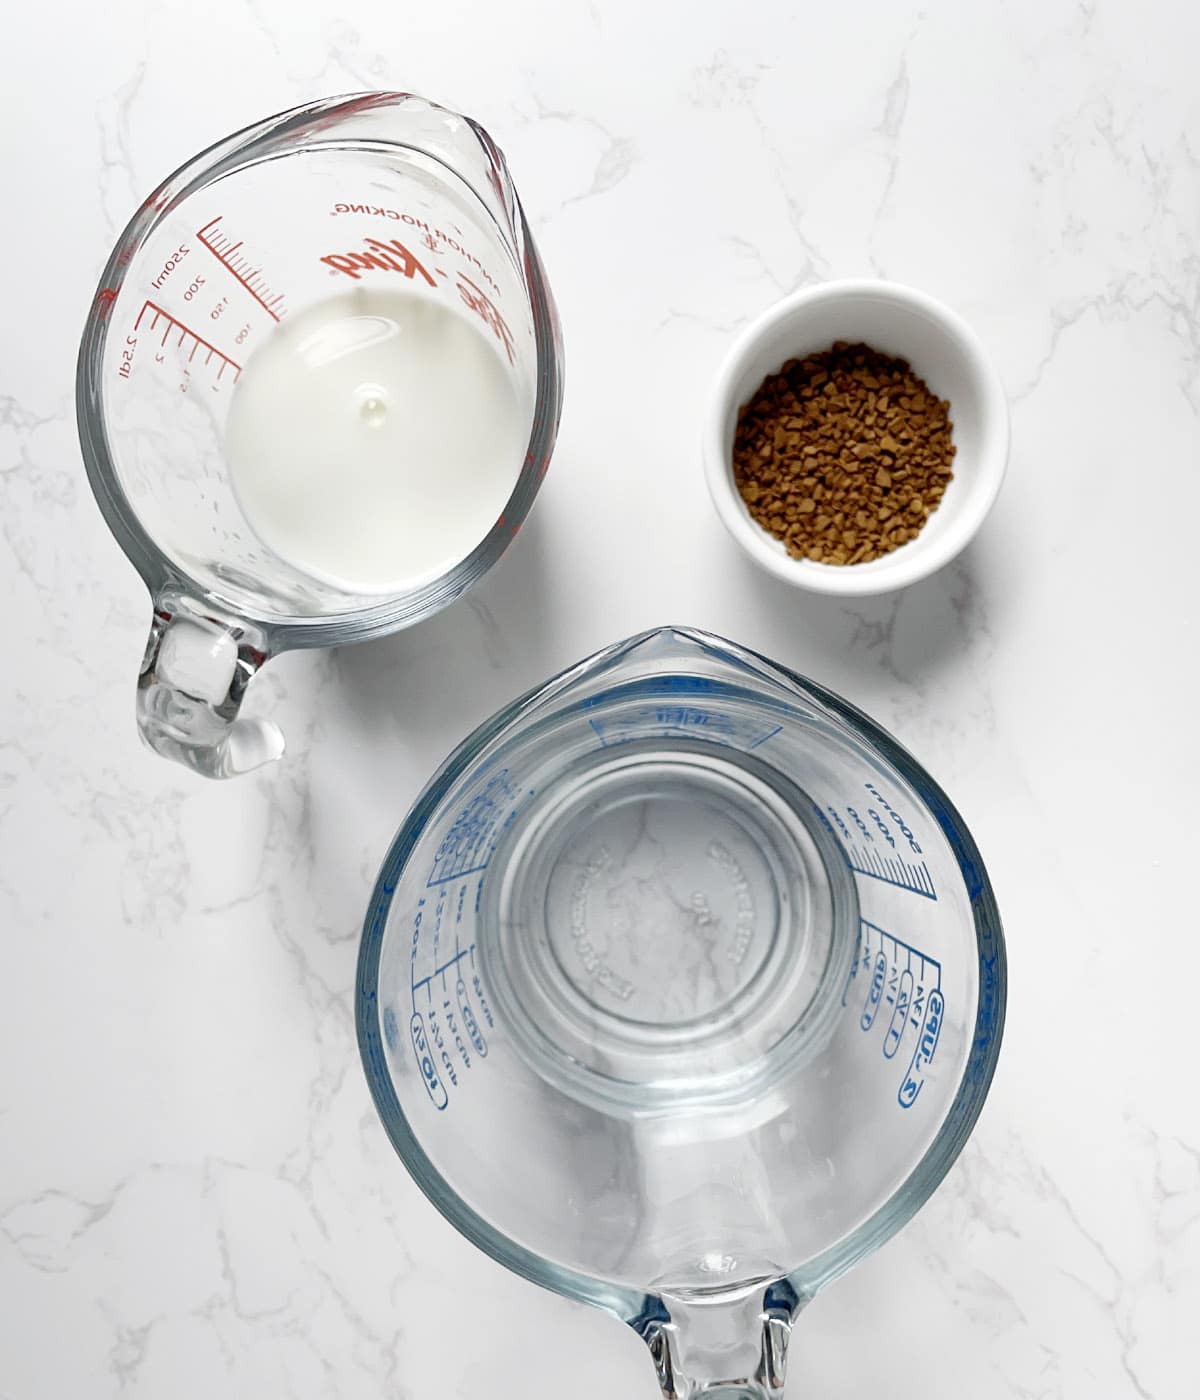 A measuring cup containing water, a measuring cup containing white milk, and white round dish containing brown coffee granules.